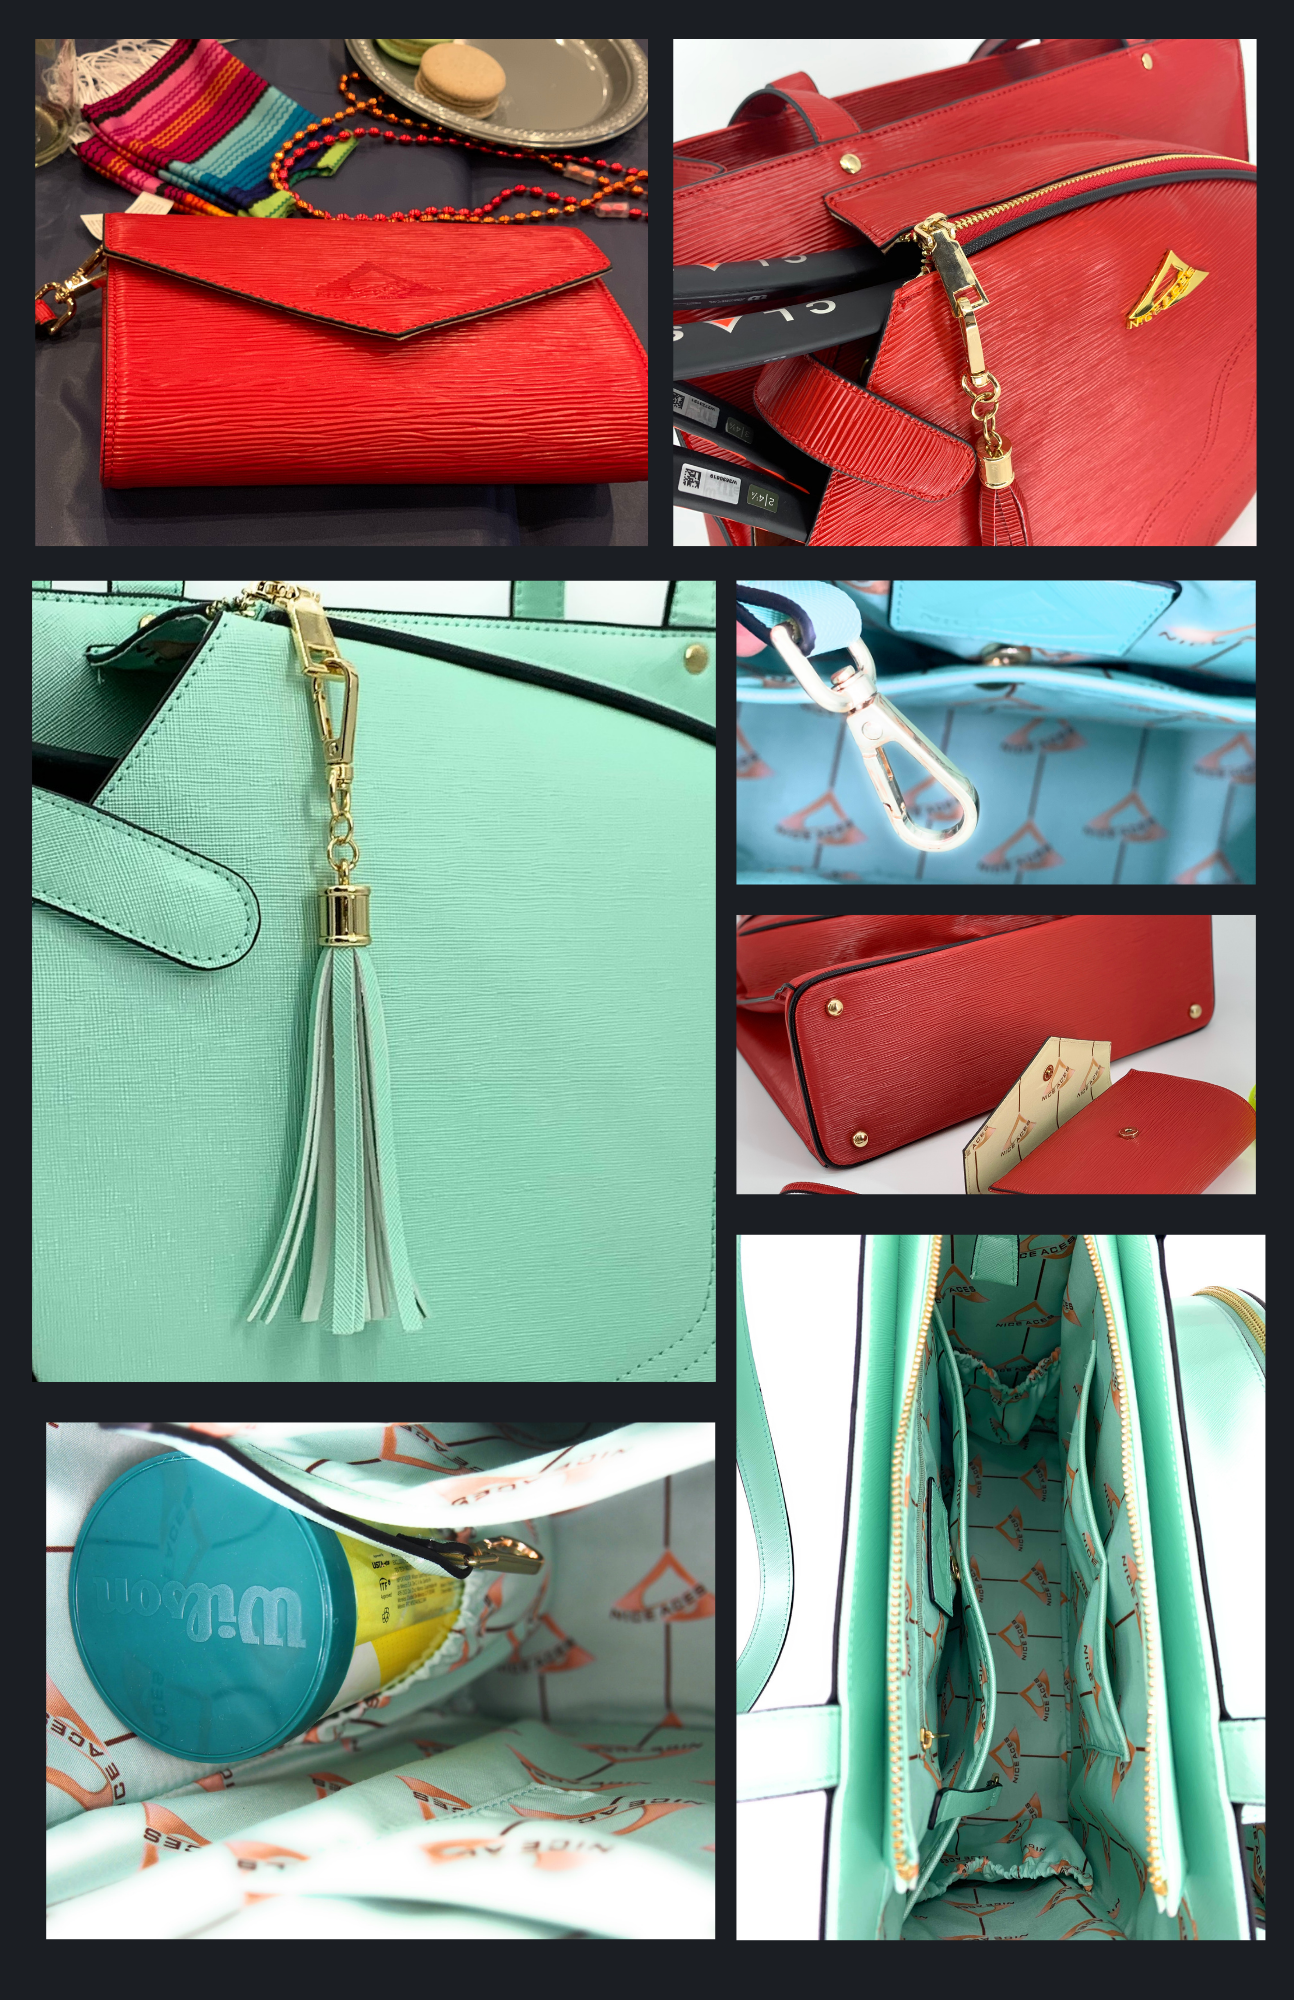 Maya Tennis Tote - Mint Green - by NiceAces - Mercantile Mountain